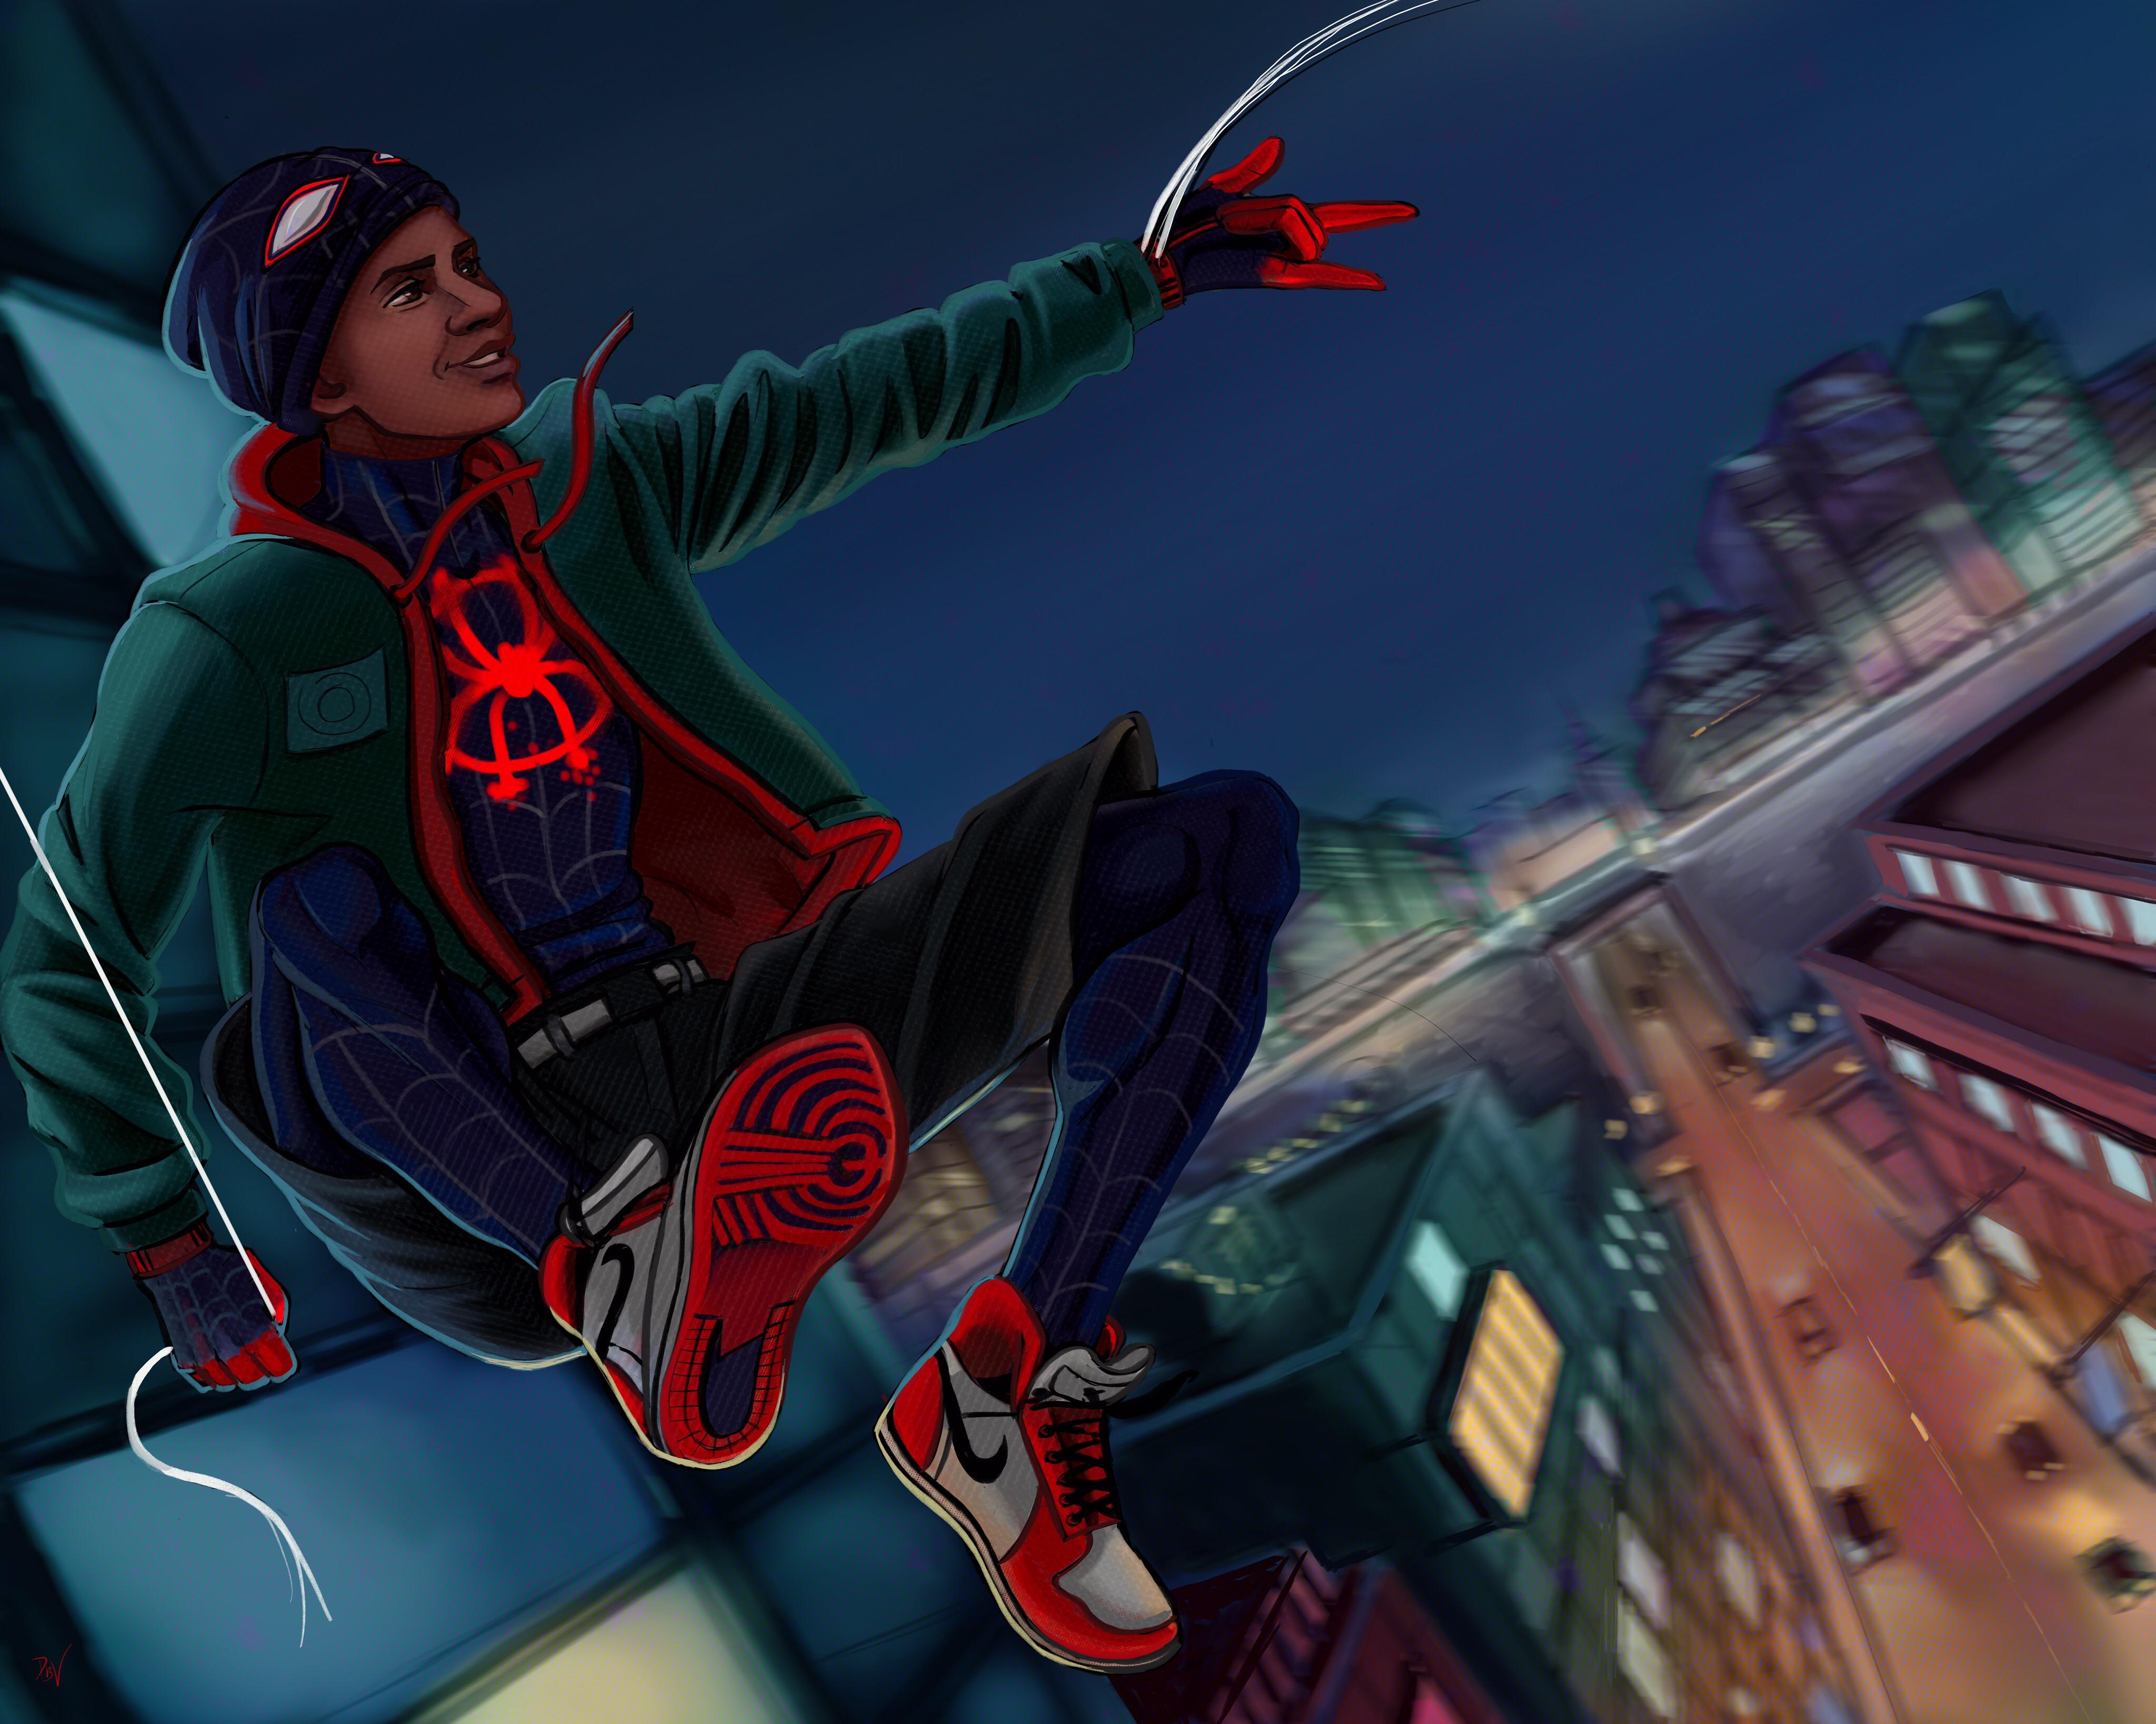 Miles morales android. Майлз Моралес. Майлз Моралес арт. Mail morales. Человек-паук (Майлз Моралес).